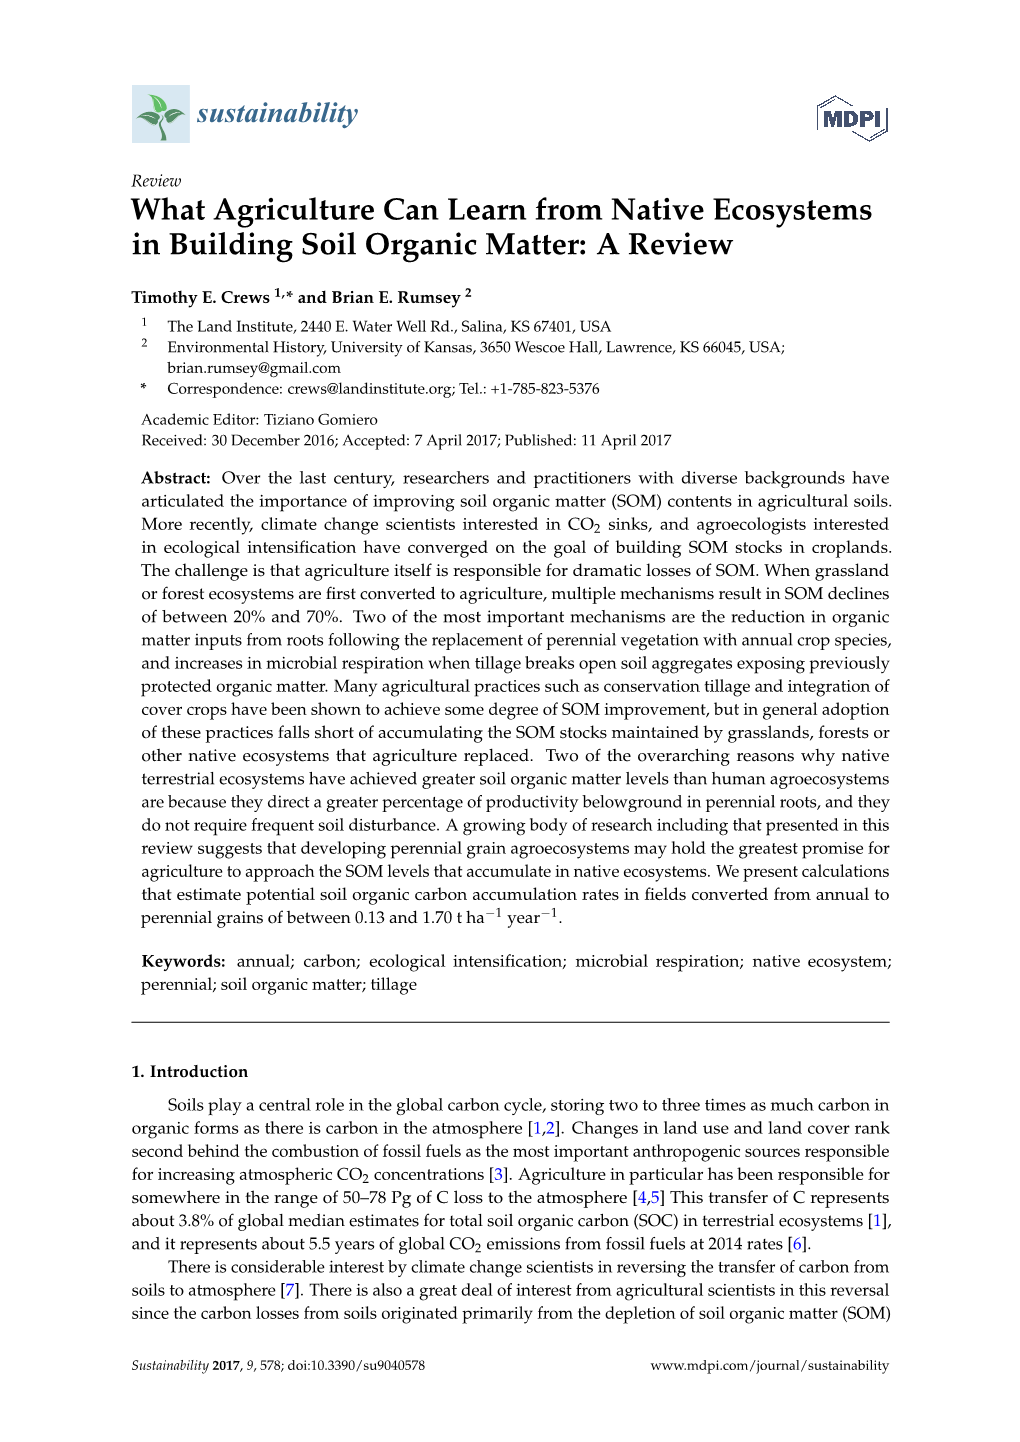 What Agriculture Can Learn from Native Ecosystems in Building Soil Organic Matter: a Review